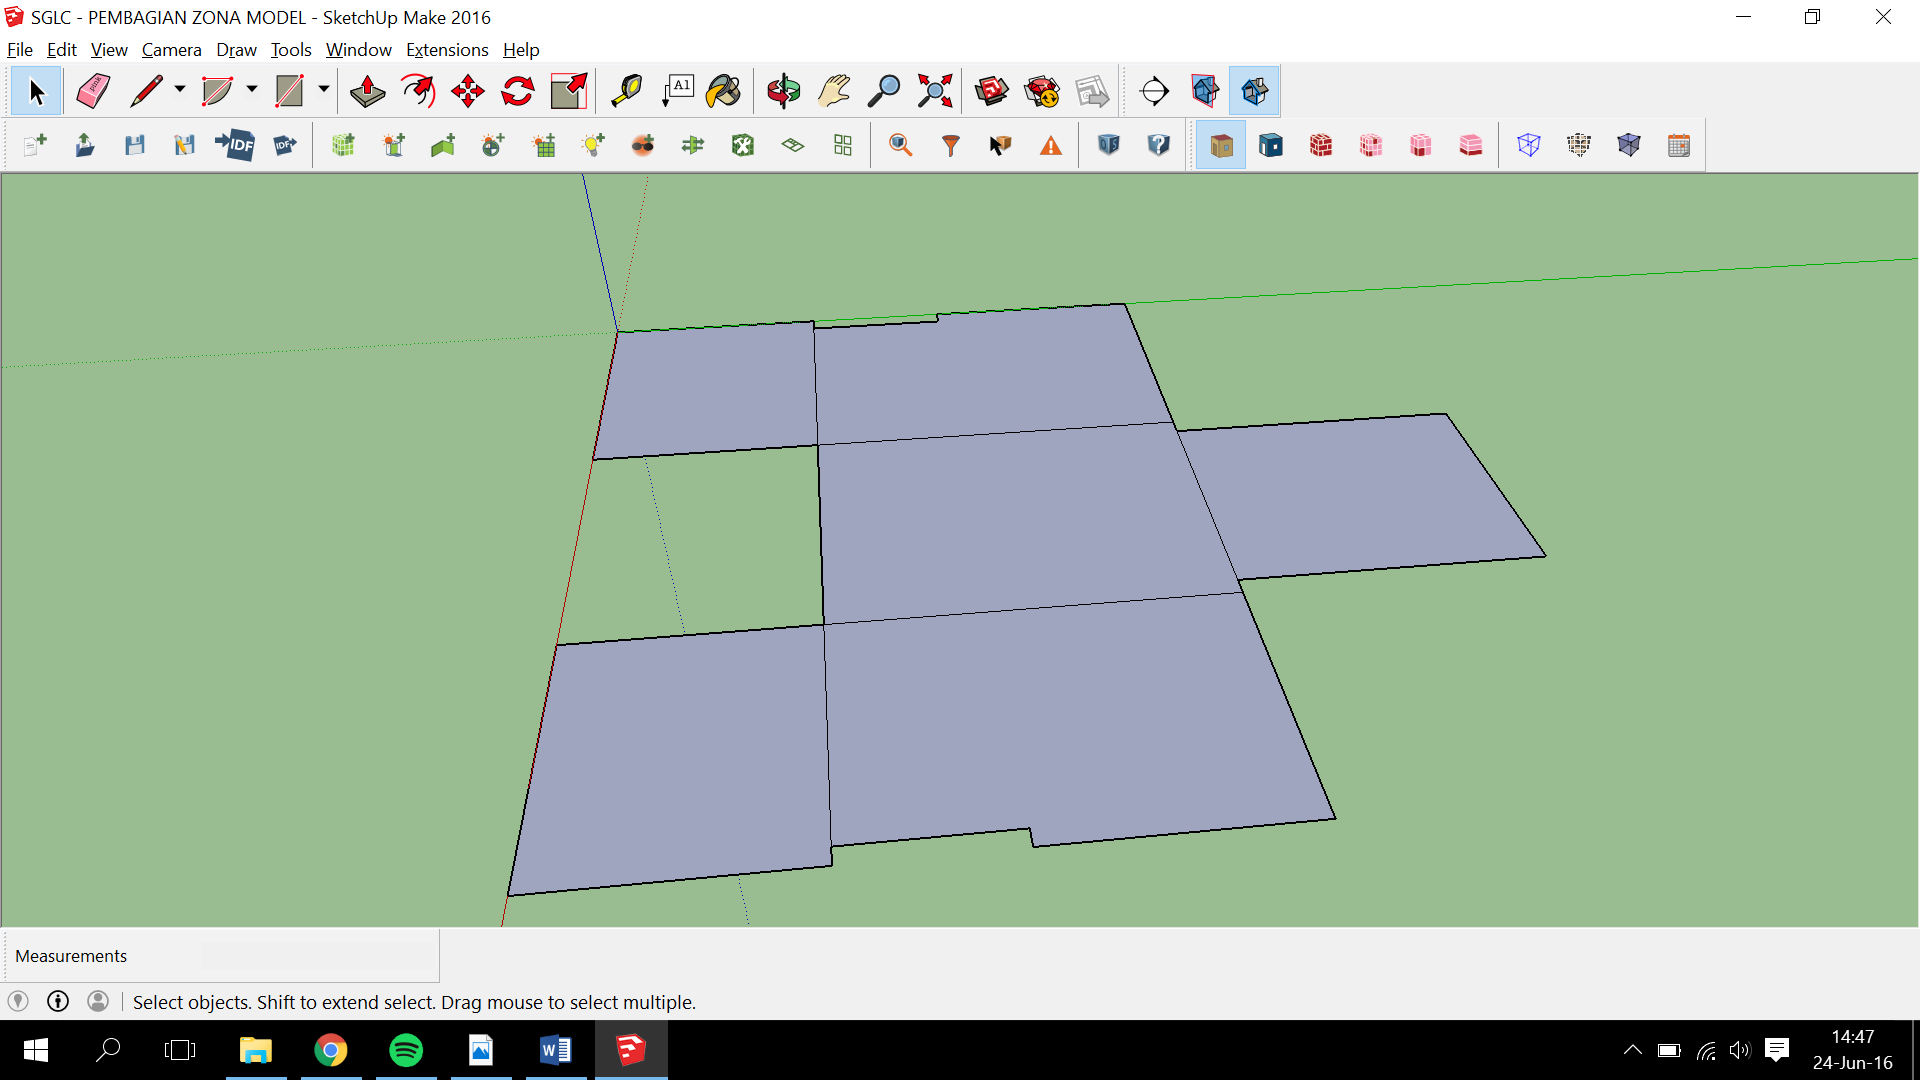 This is Preview Zone in Sketchup